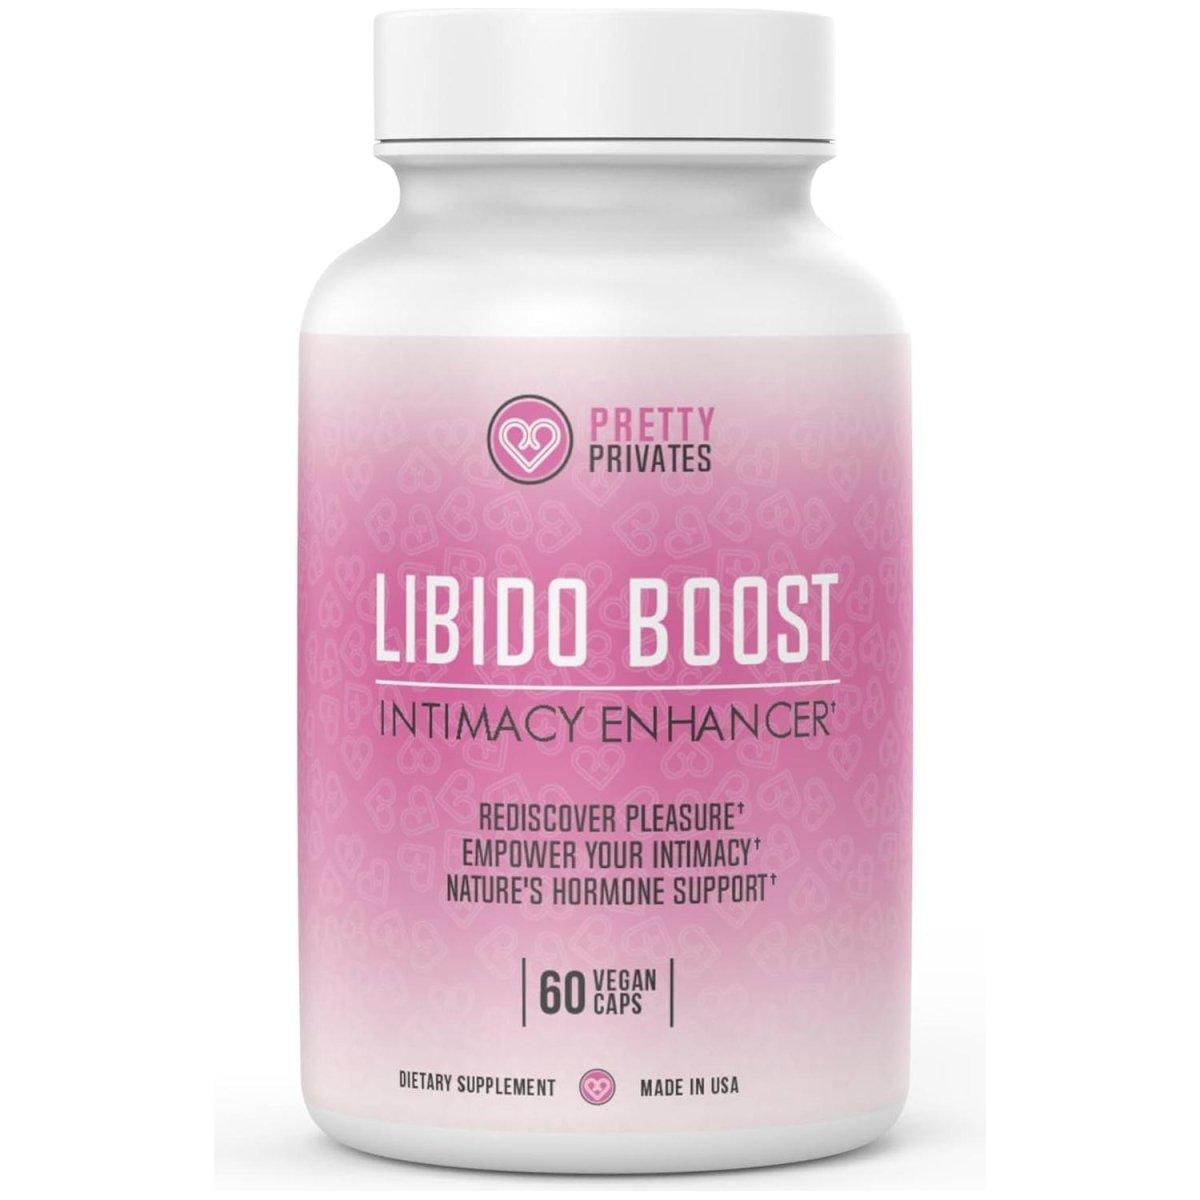 Pretty Privates Libido Booster Intimacy Enhancer - 60 Ct - Glam Global UK